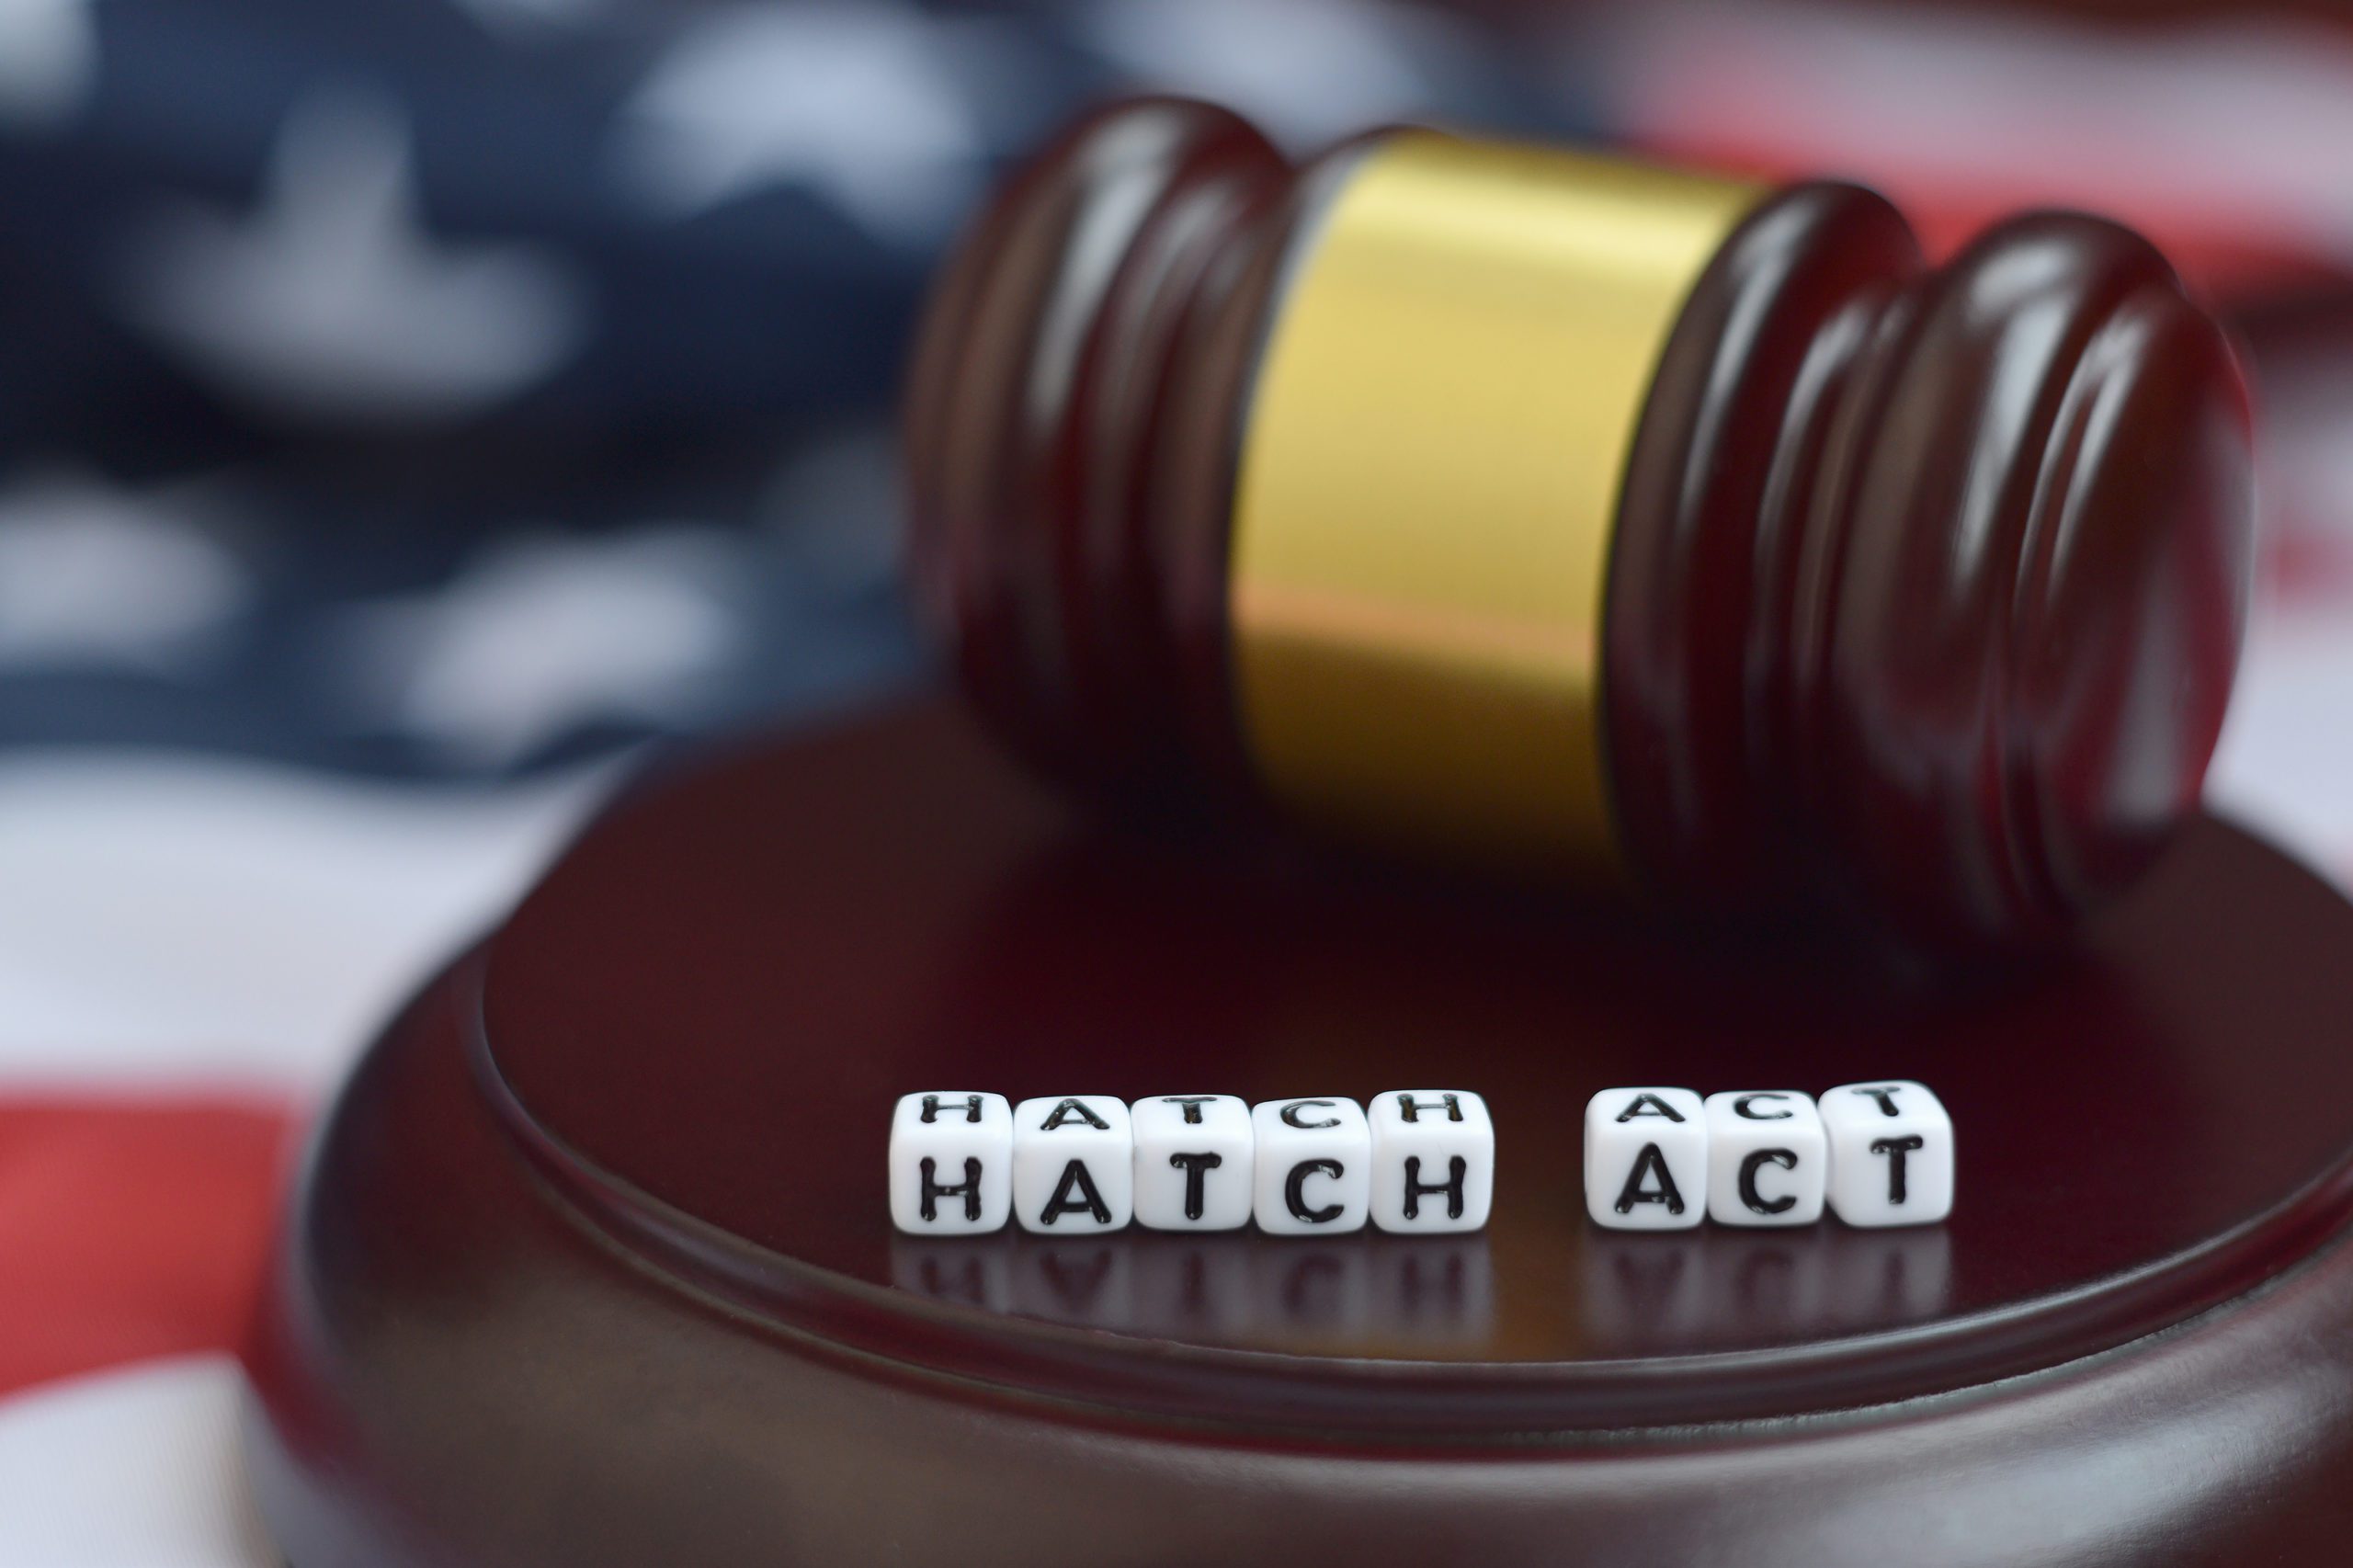 Justice,Mallet,And,Hatch,Act,Characters,With,Us,Flag,On